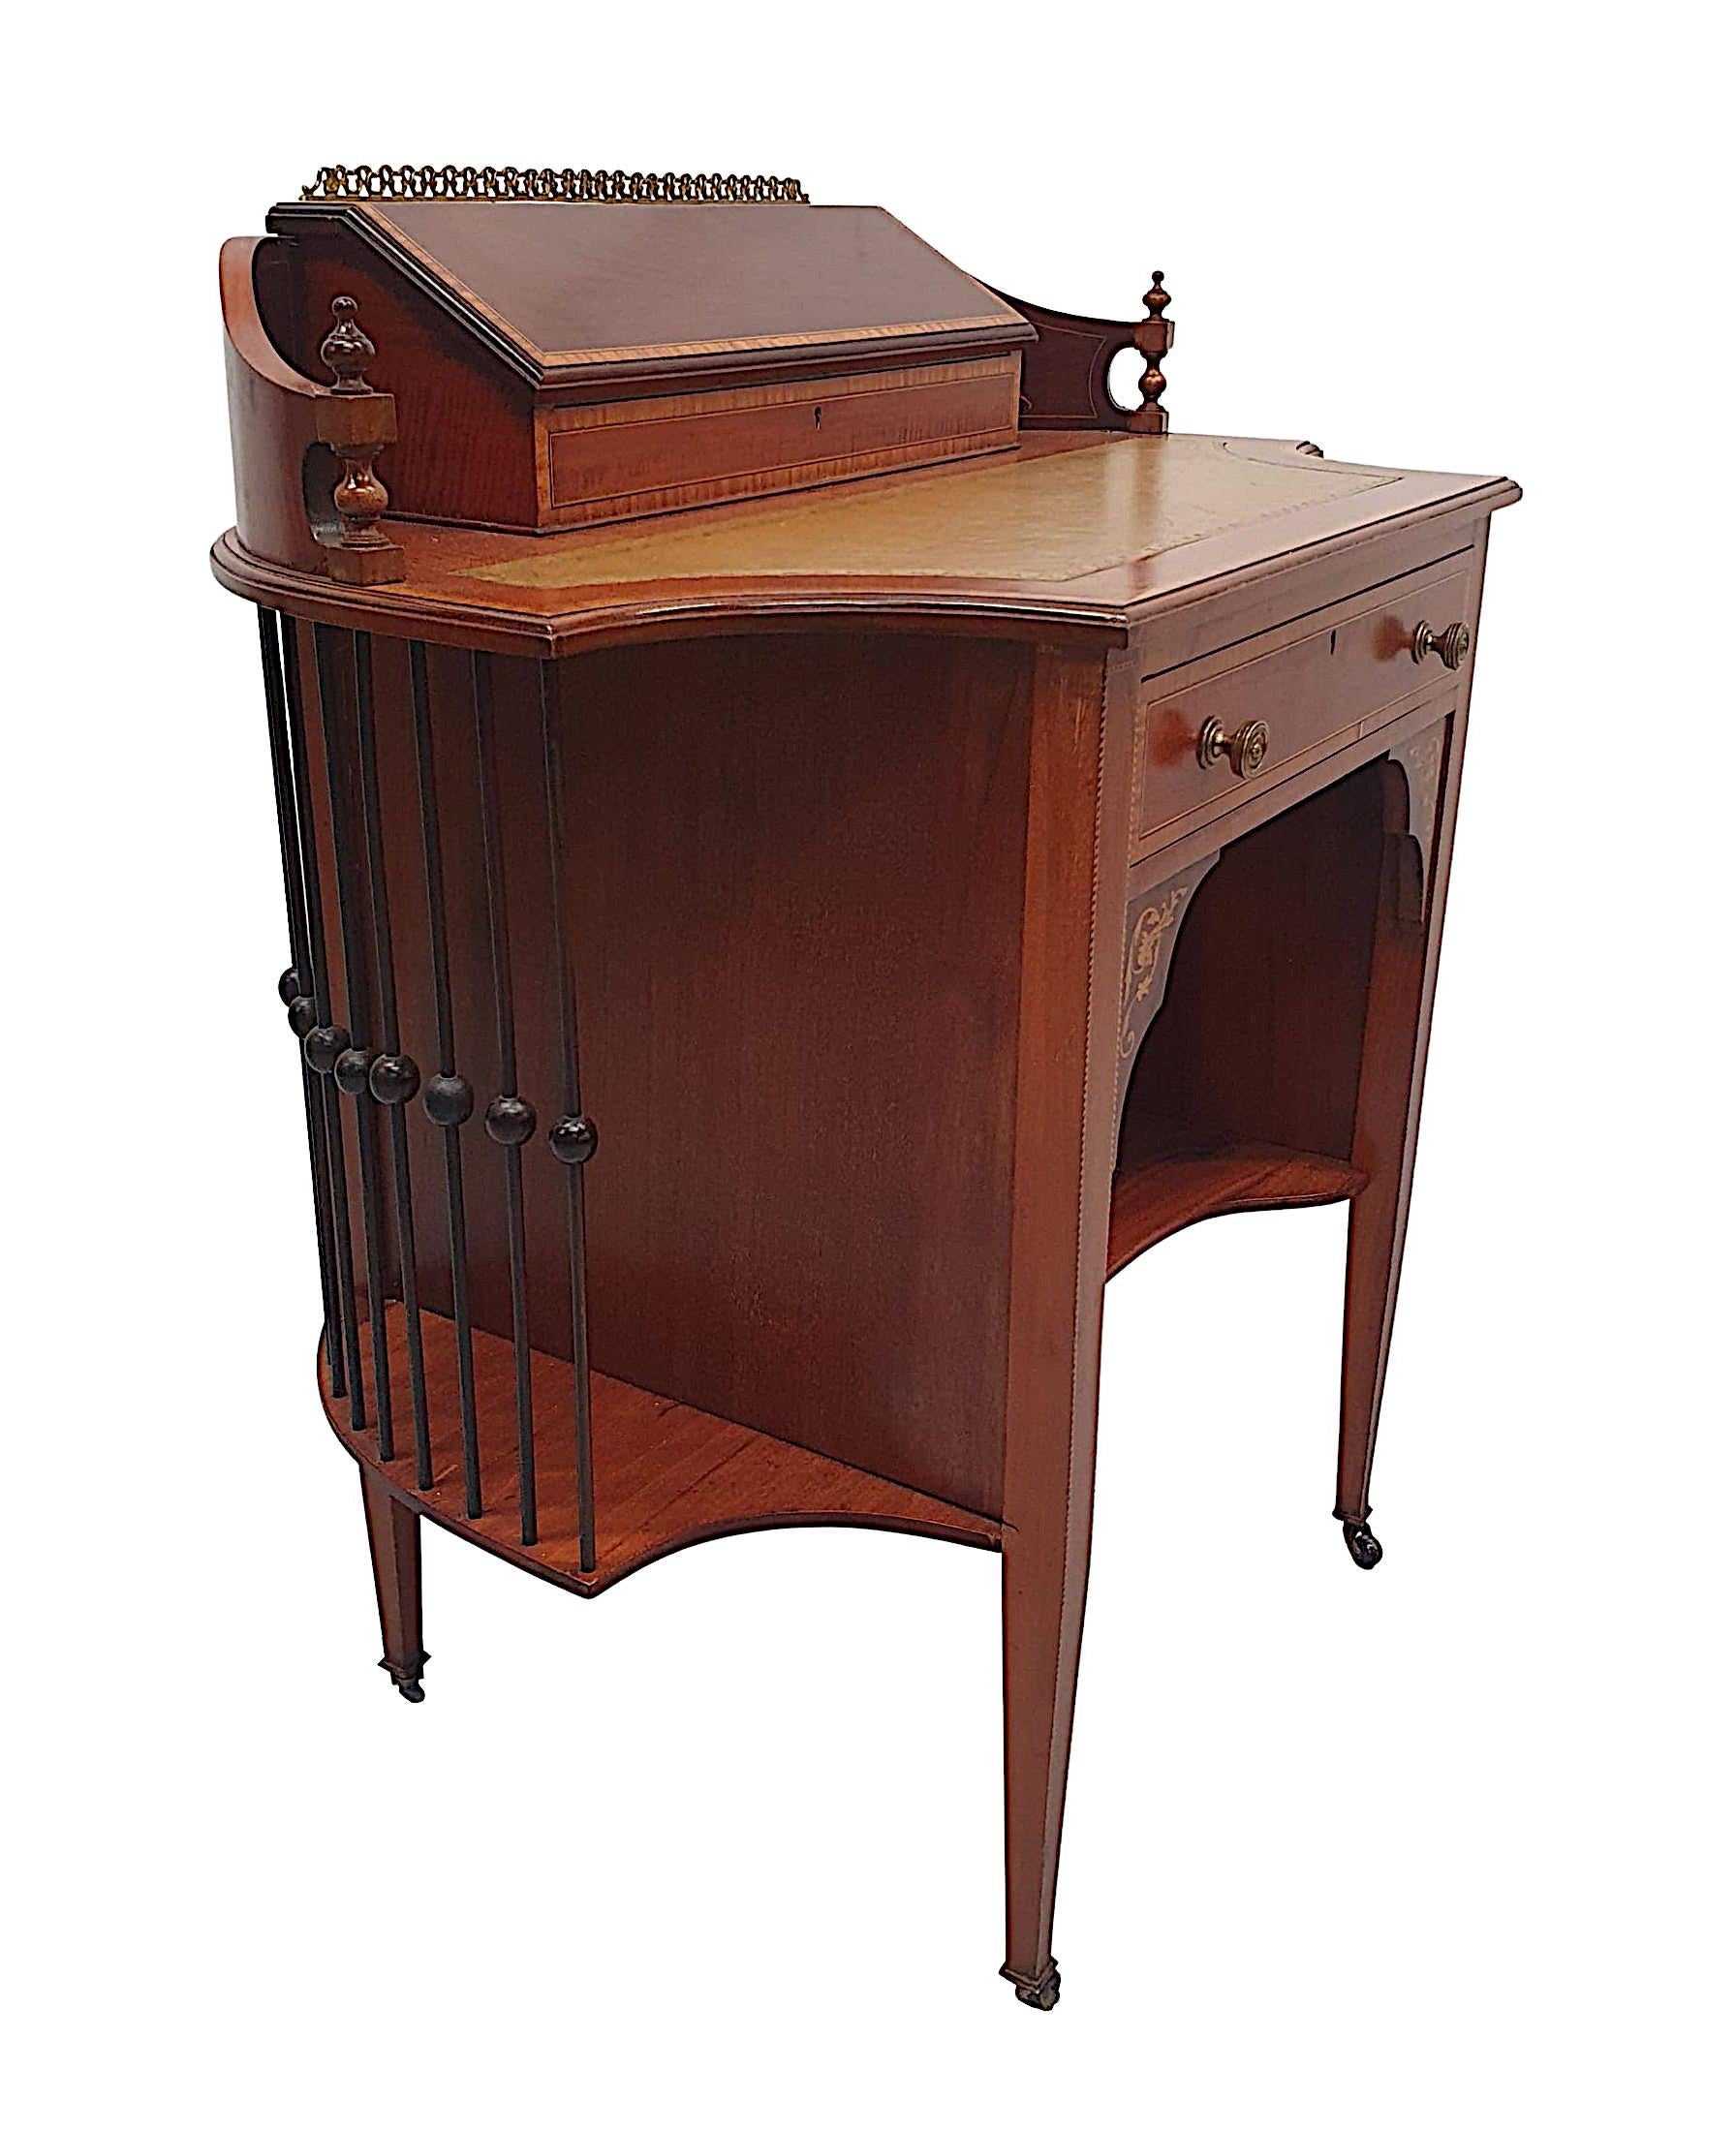 A fine and unusual Edwardian mahogany ladies leather top desk, with gorgeously rich patination and grain. Line inlaid, cross banded and with exquisite marquetry detail, depicting scrolling foliate and flowerhead motif detail throughout. The moulded